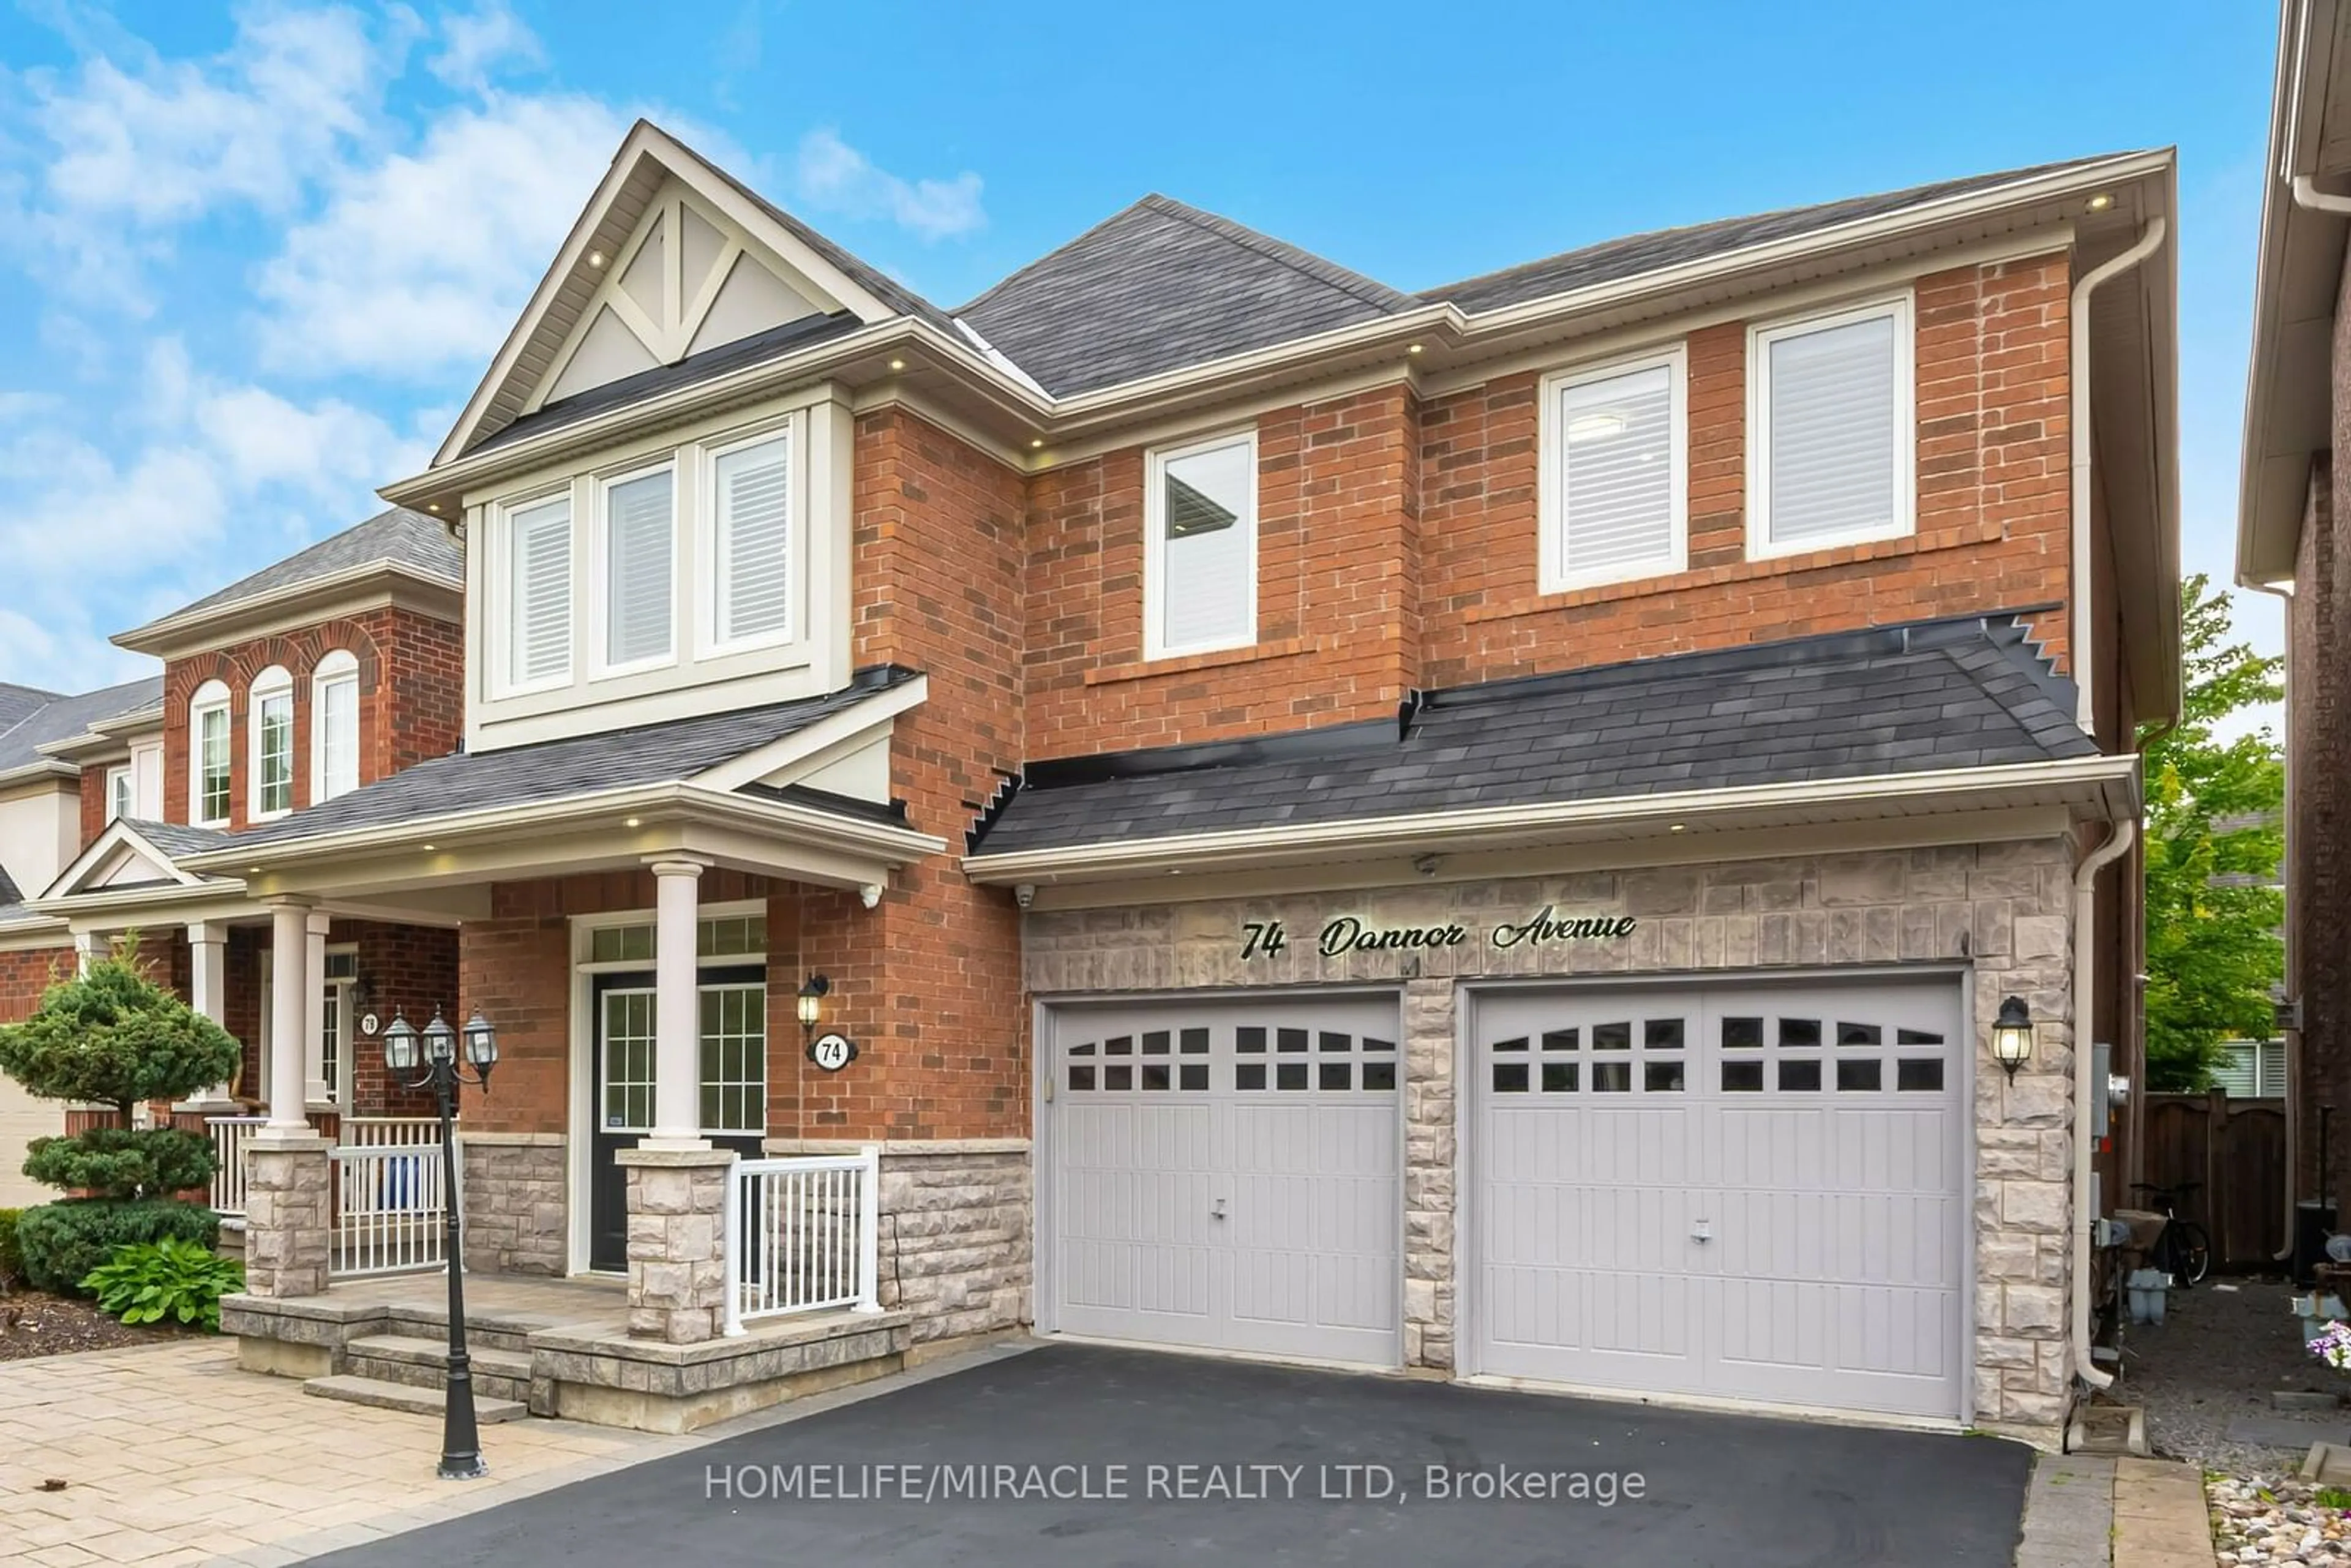 Home with brick exterior material for 74 Dannor Ave, Whitchurch-Stouffville Ontario L4A 0V6